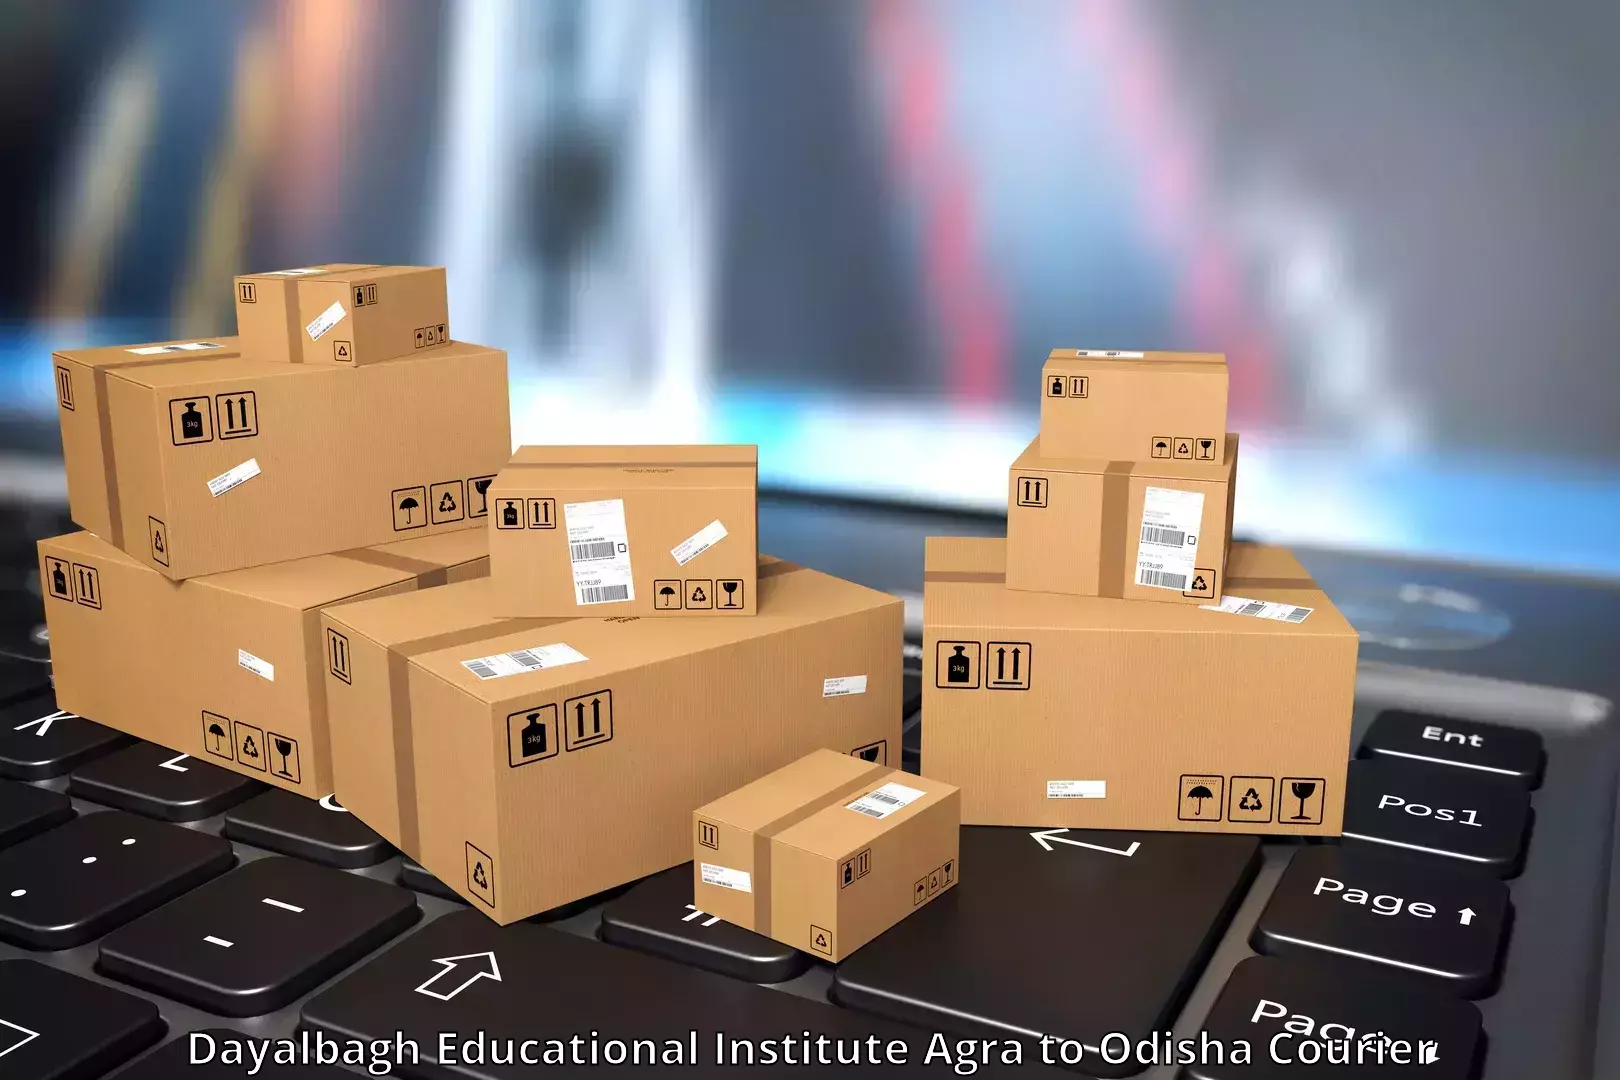 Expedited shipping methods Dayalbagh Educational Institute Agra to Jashipur